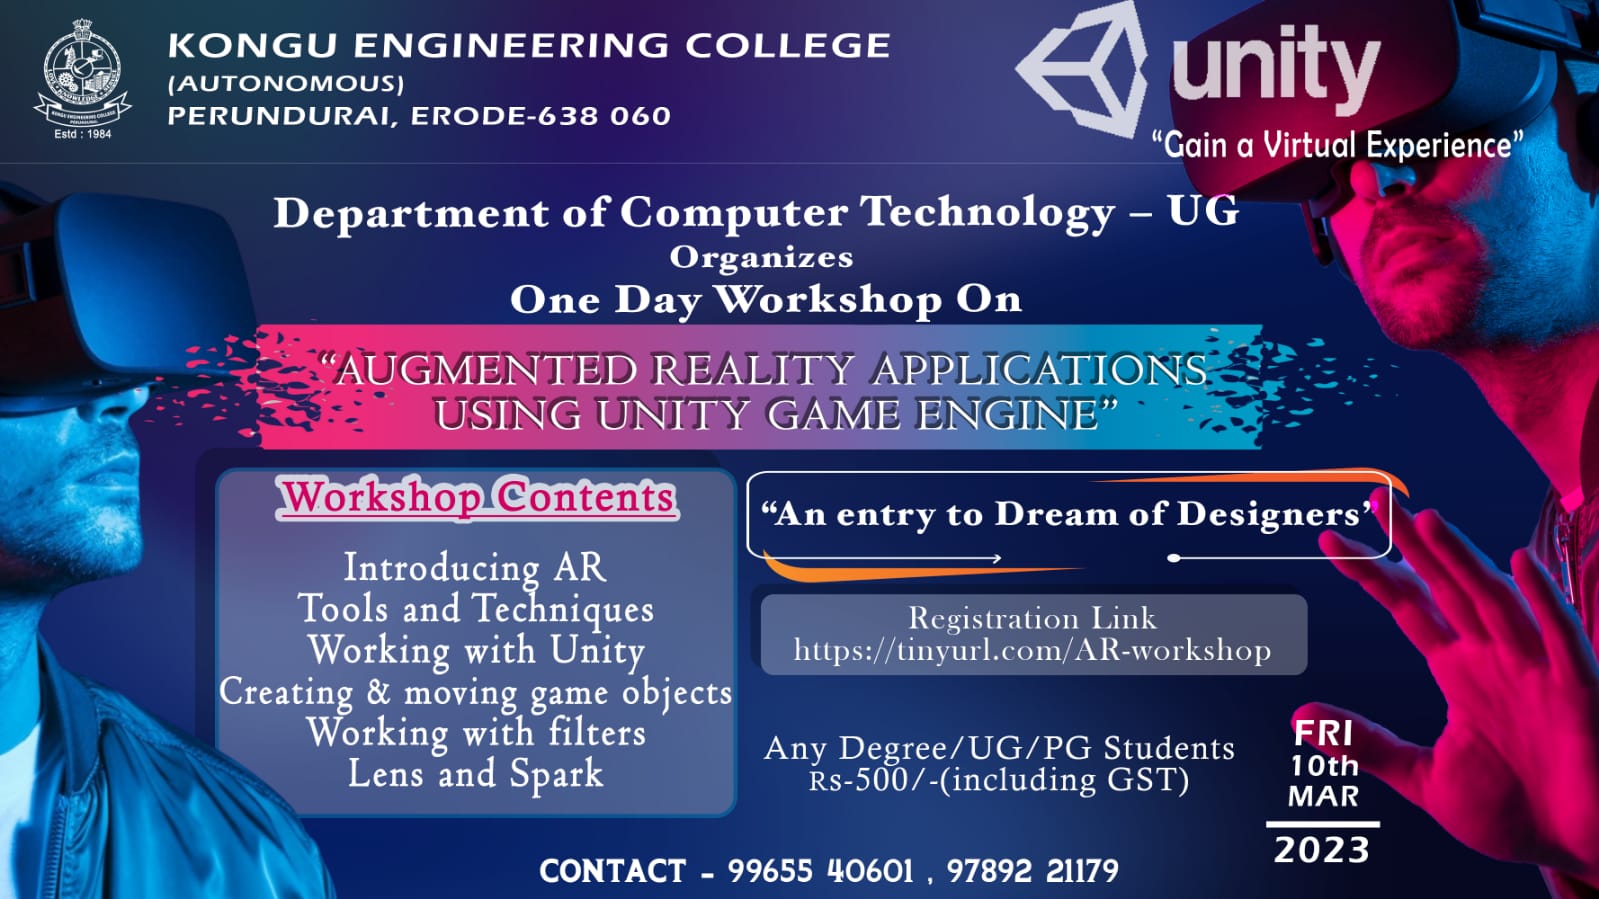 One day Workshop on Augmented Reality Applications Using Unity Game Engine 2023